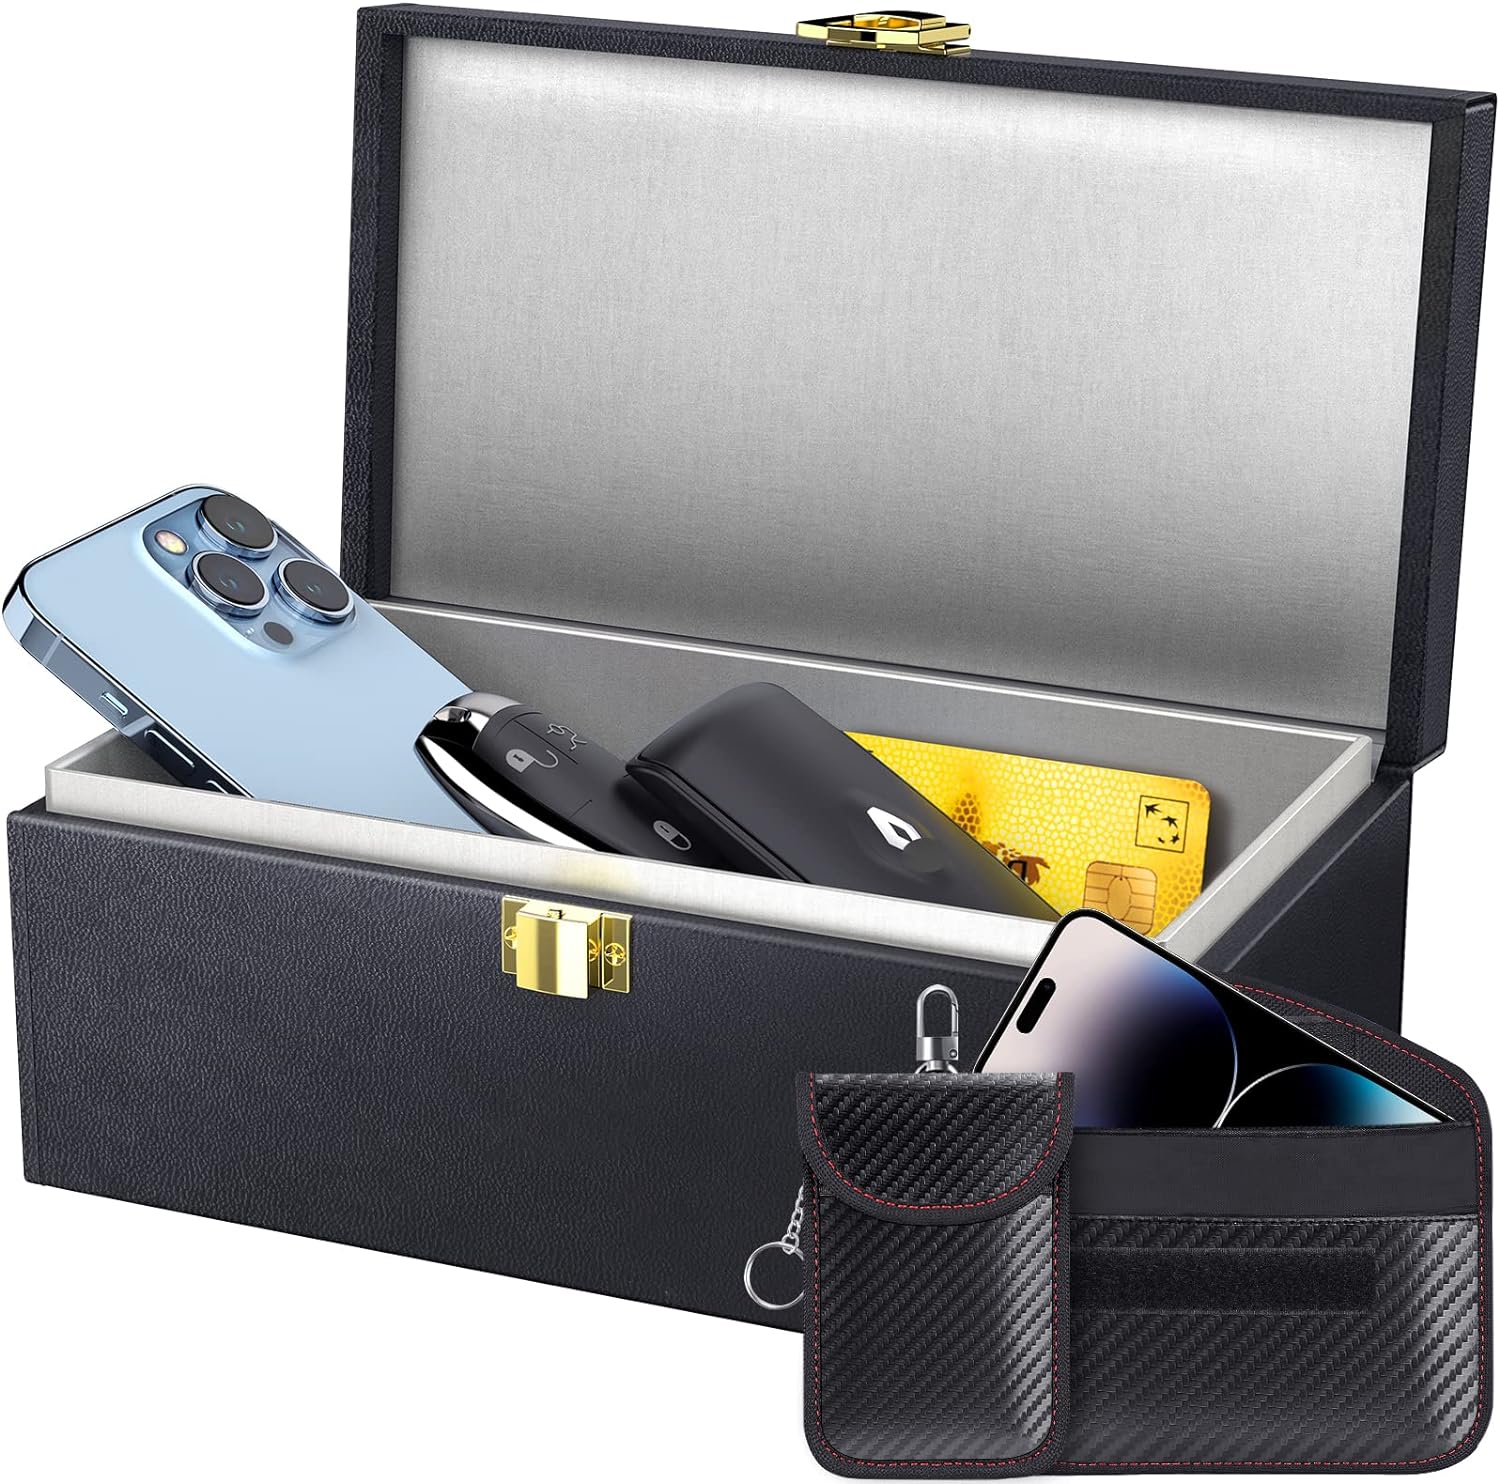 Snag Your Discount! Samfolk Faraday Box and Pouch 2 Pack - Protect Your Car Keys Now